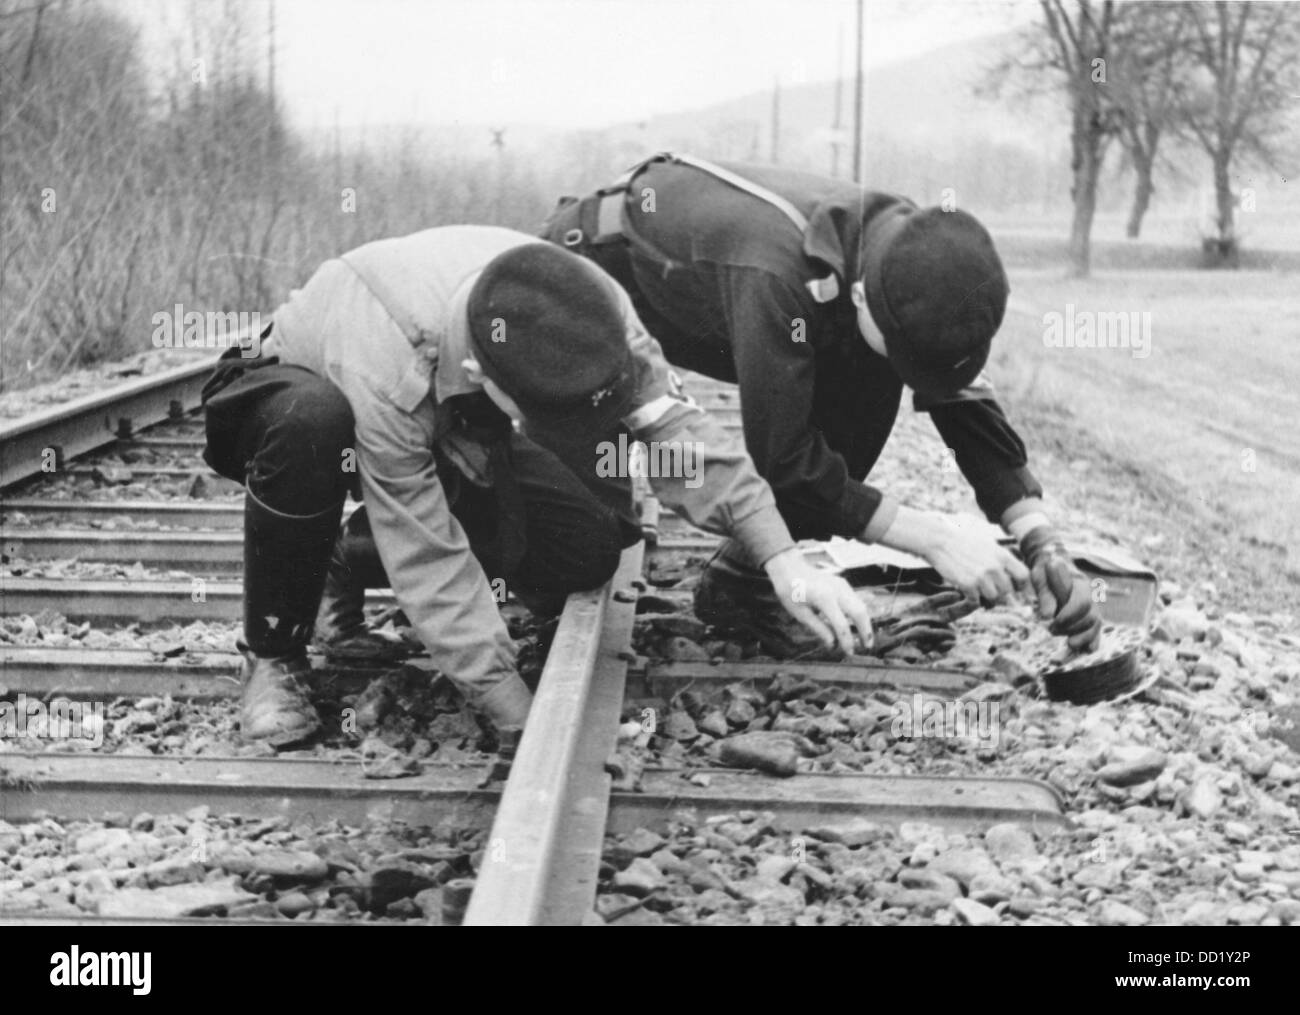 The image from the Nazi Propaganda! shows members of the communications branch of the Hitler Youth laying radio cables near Berka in Germany. Date unknown. Fotoarchiv für Zeitgeschichte Stock Photo